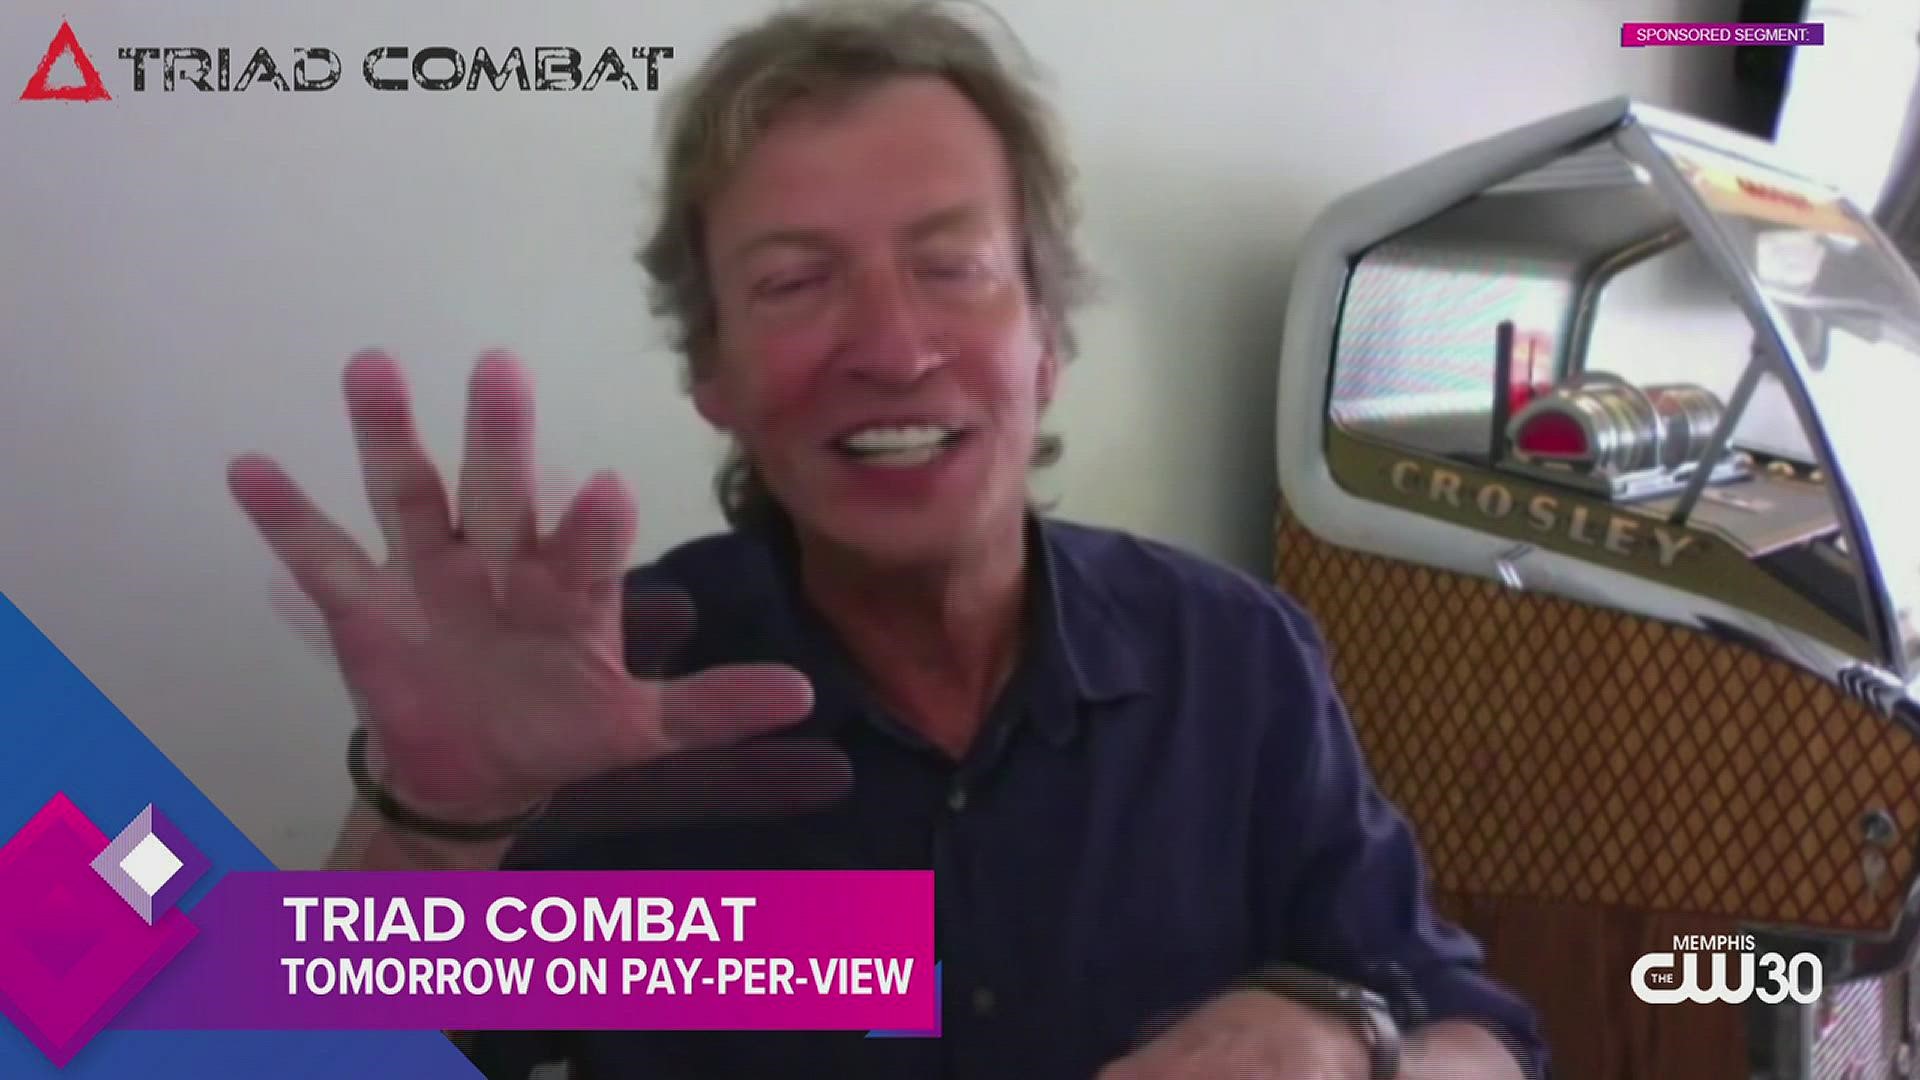 What happens when you combine boxing and mixed martial arts? Get a sneak peak of Nigel Lythgoe's "Triad Combat." Show kicks off Saturday, 11/27/21 on Pay-Per-View!